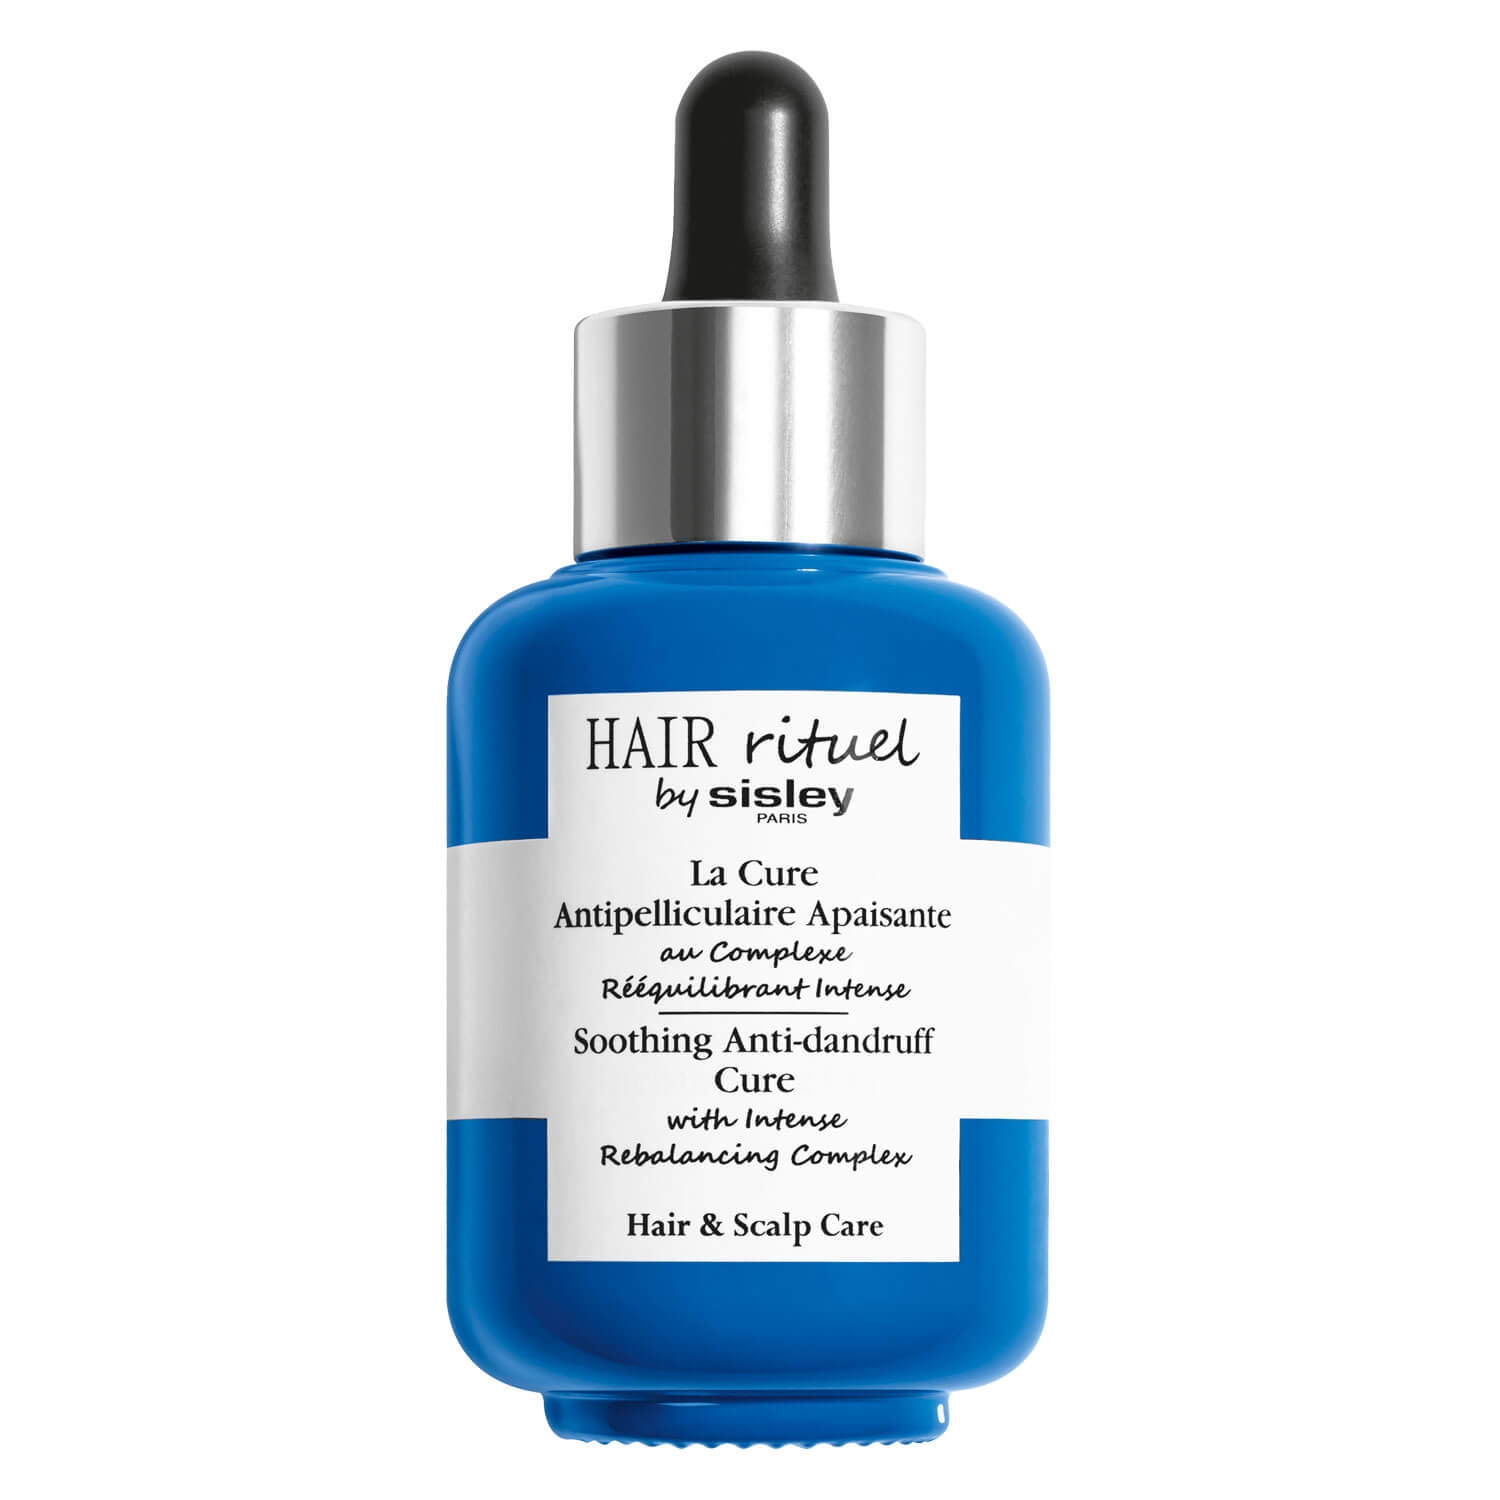 Product image from Hair Rituel by Sisley - La Cure Antipelliculaire Apaisante